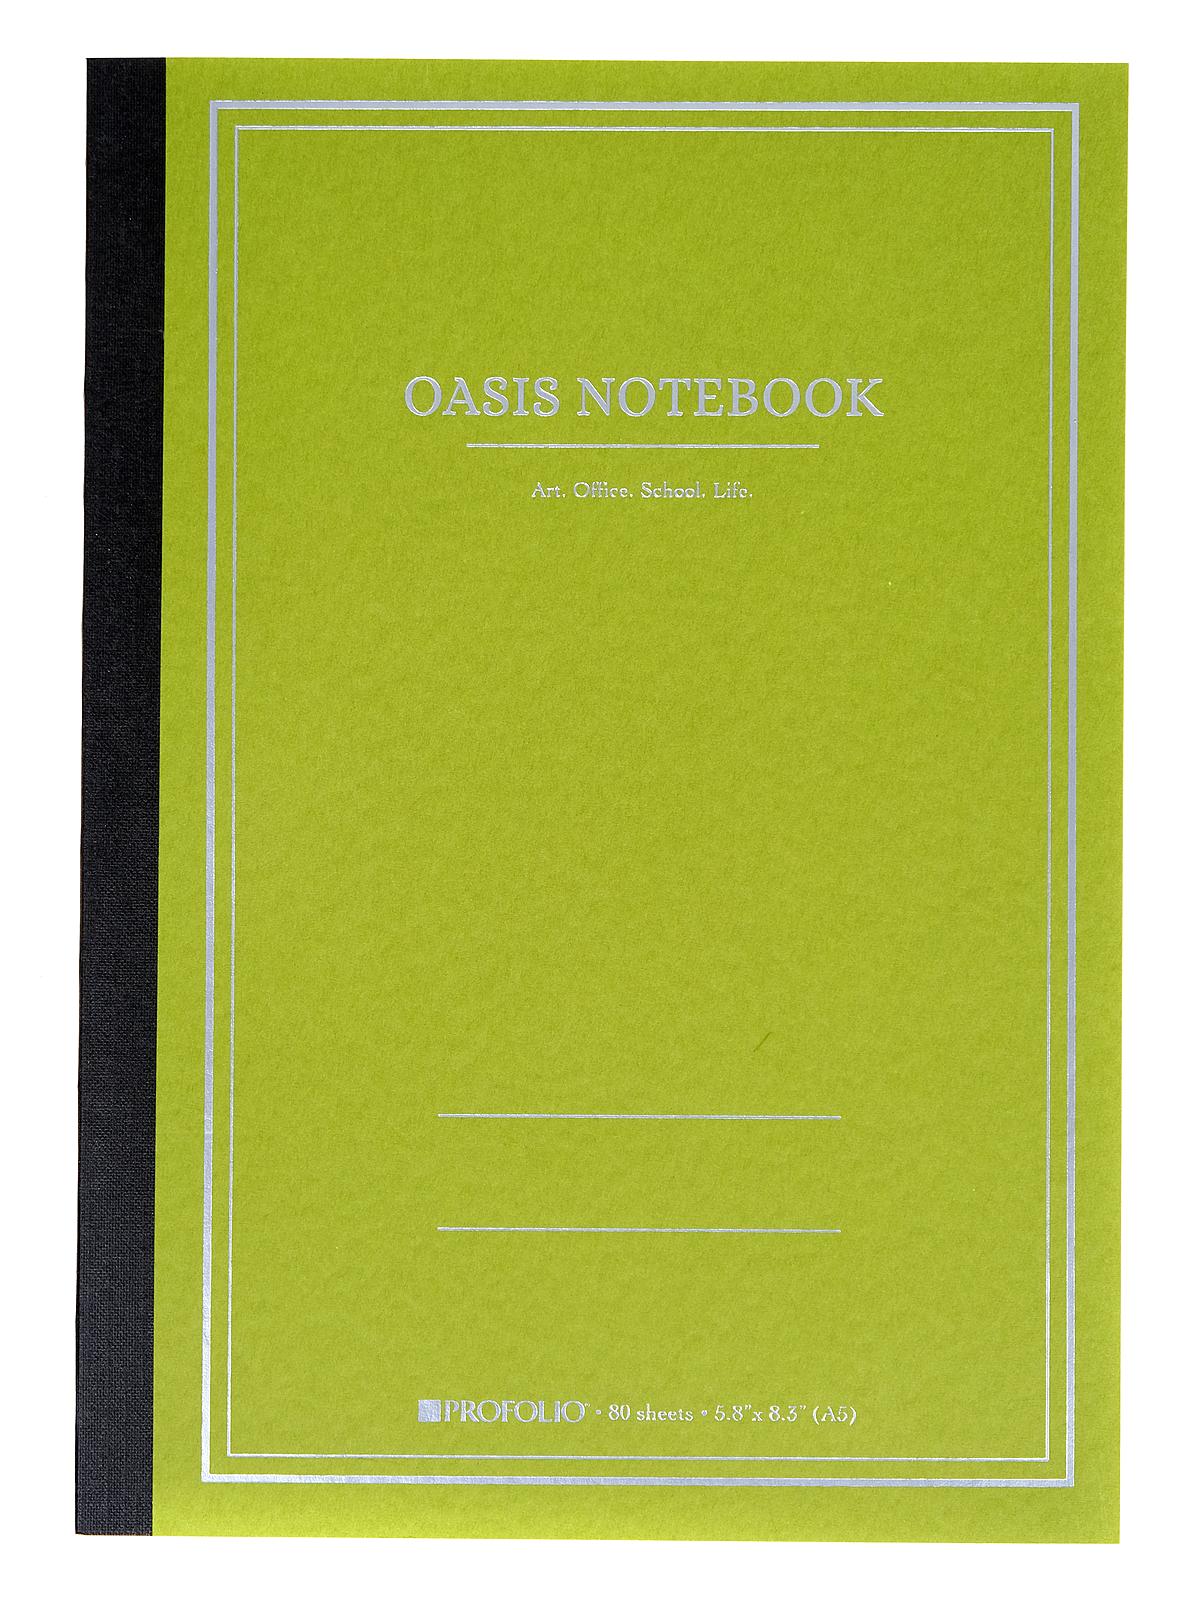 Profolio Oasis Notebook A5 5.8 In. X 8.3 In. Avocado 80 Sheets